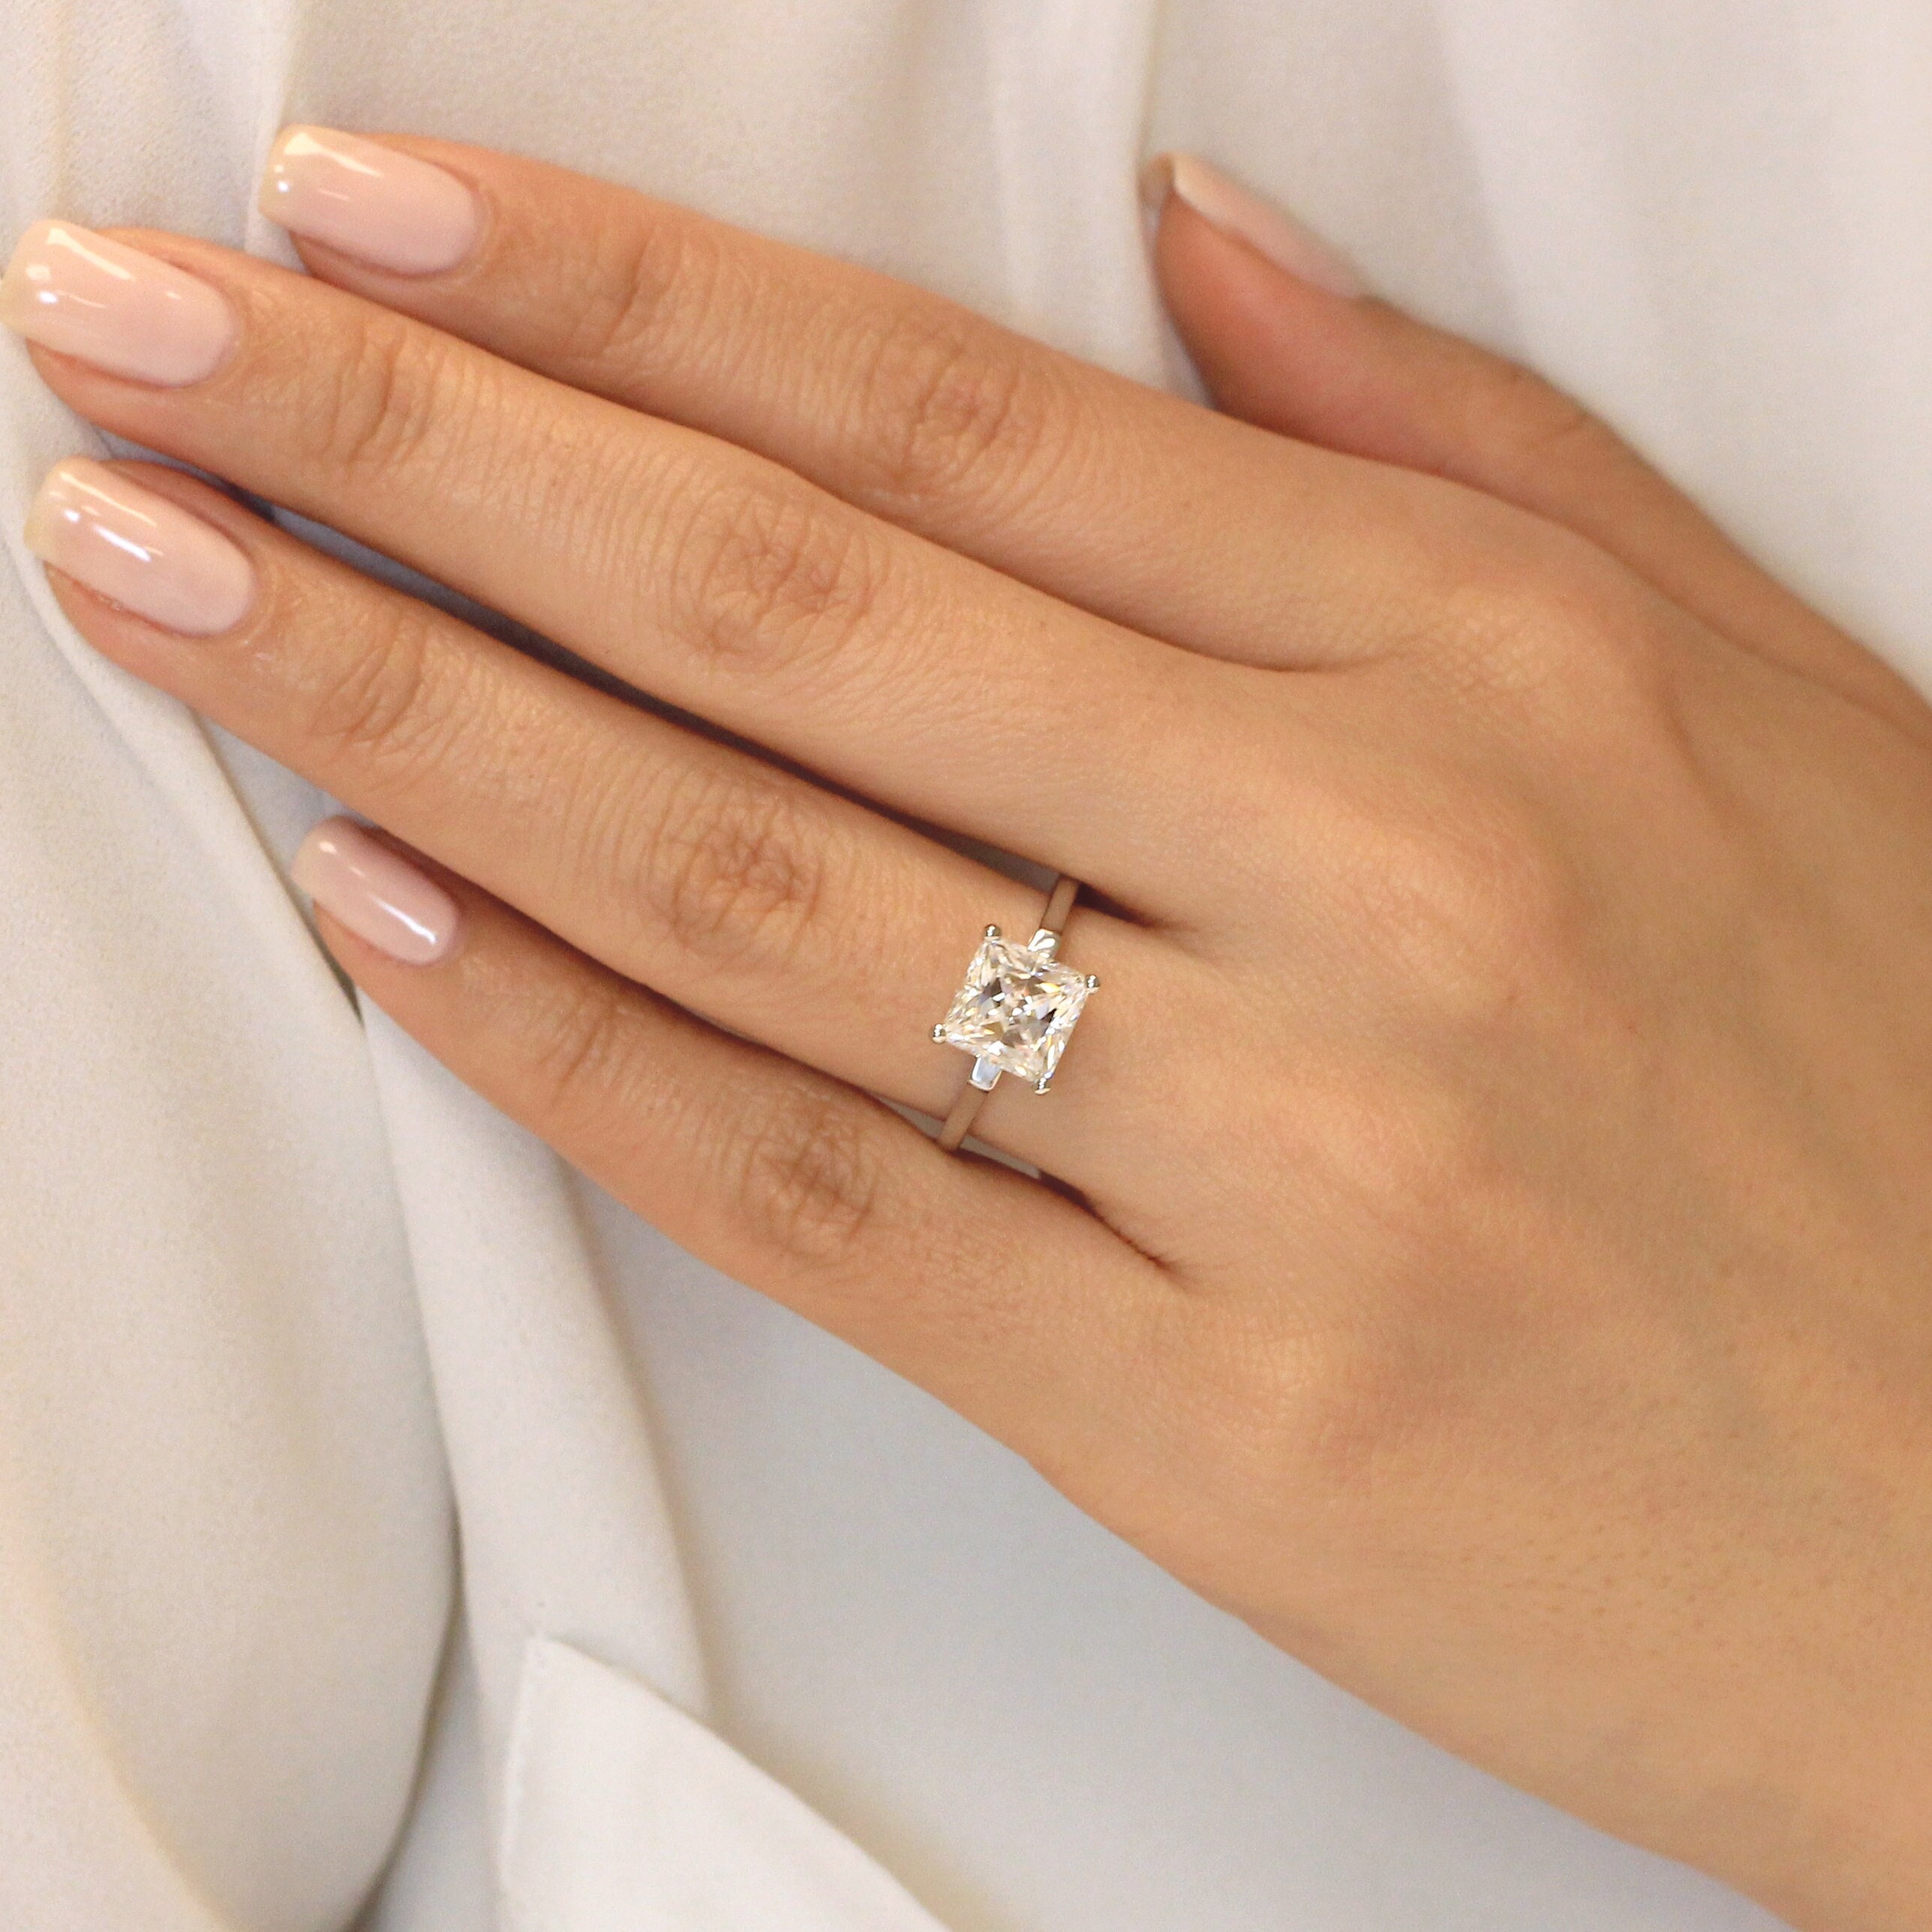 6 Square Diamond Rings We're Obsessing Over | Frank Darling